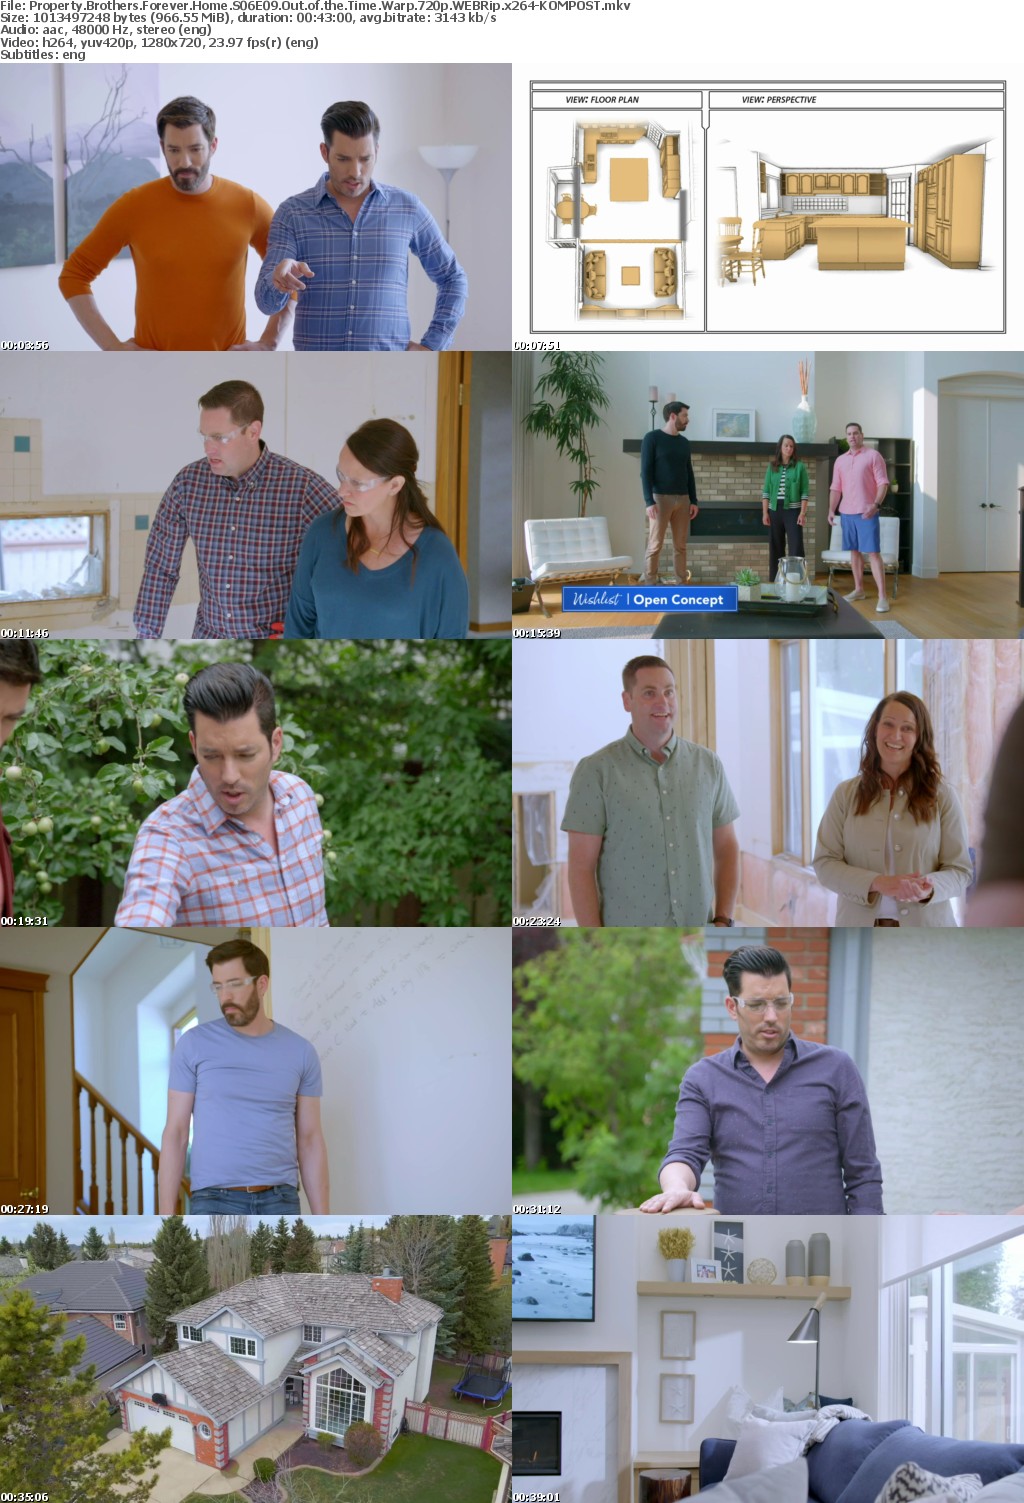 Property Brothers Forever Home S06E09 Out of the Time Warp 720p WEBRip x264-KOMPOST